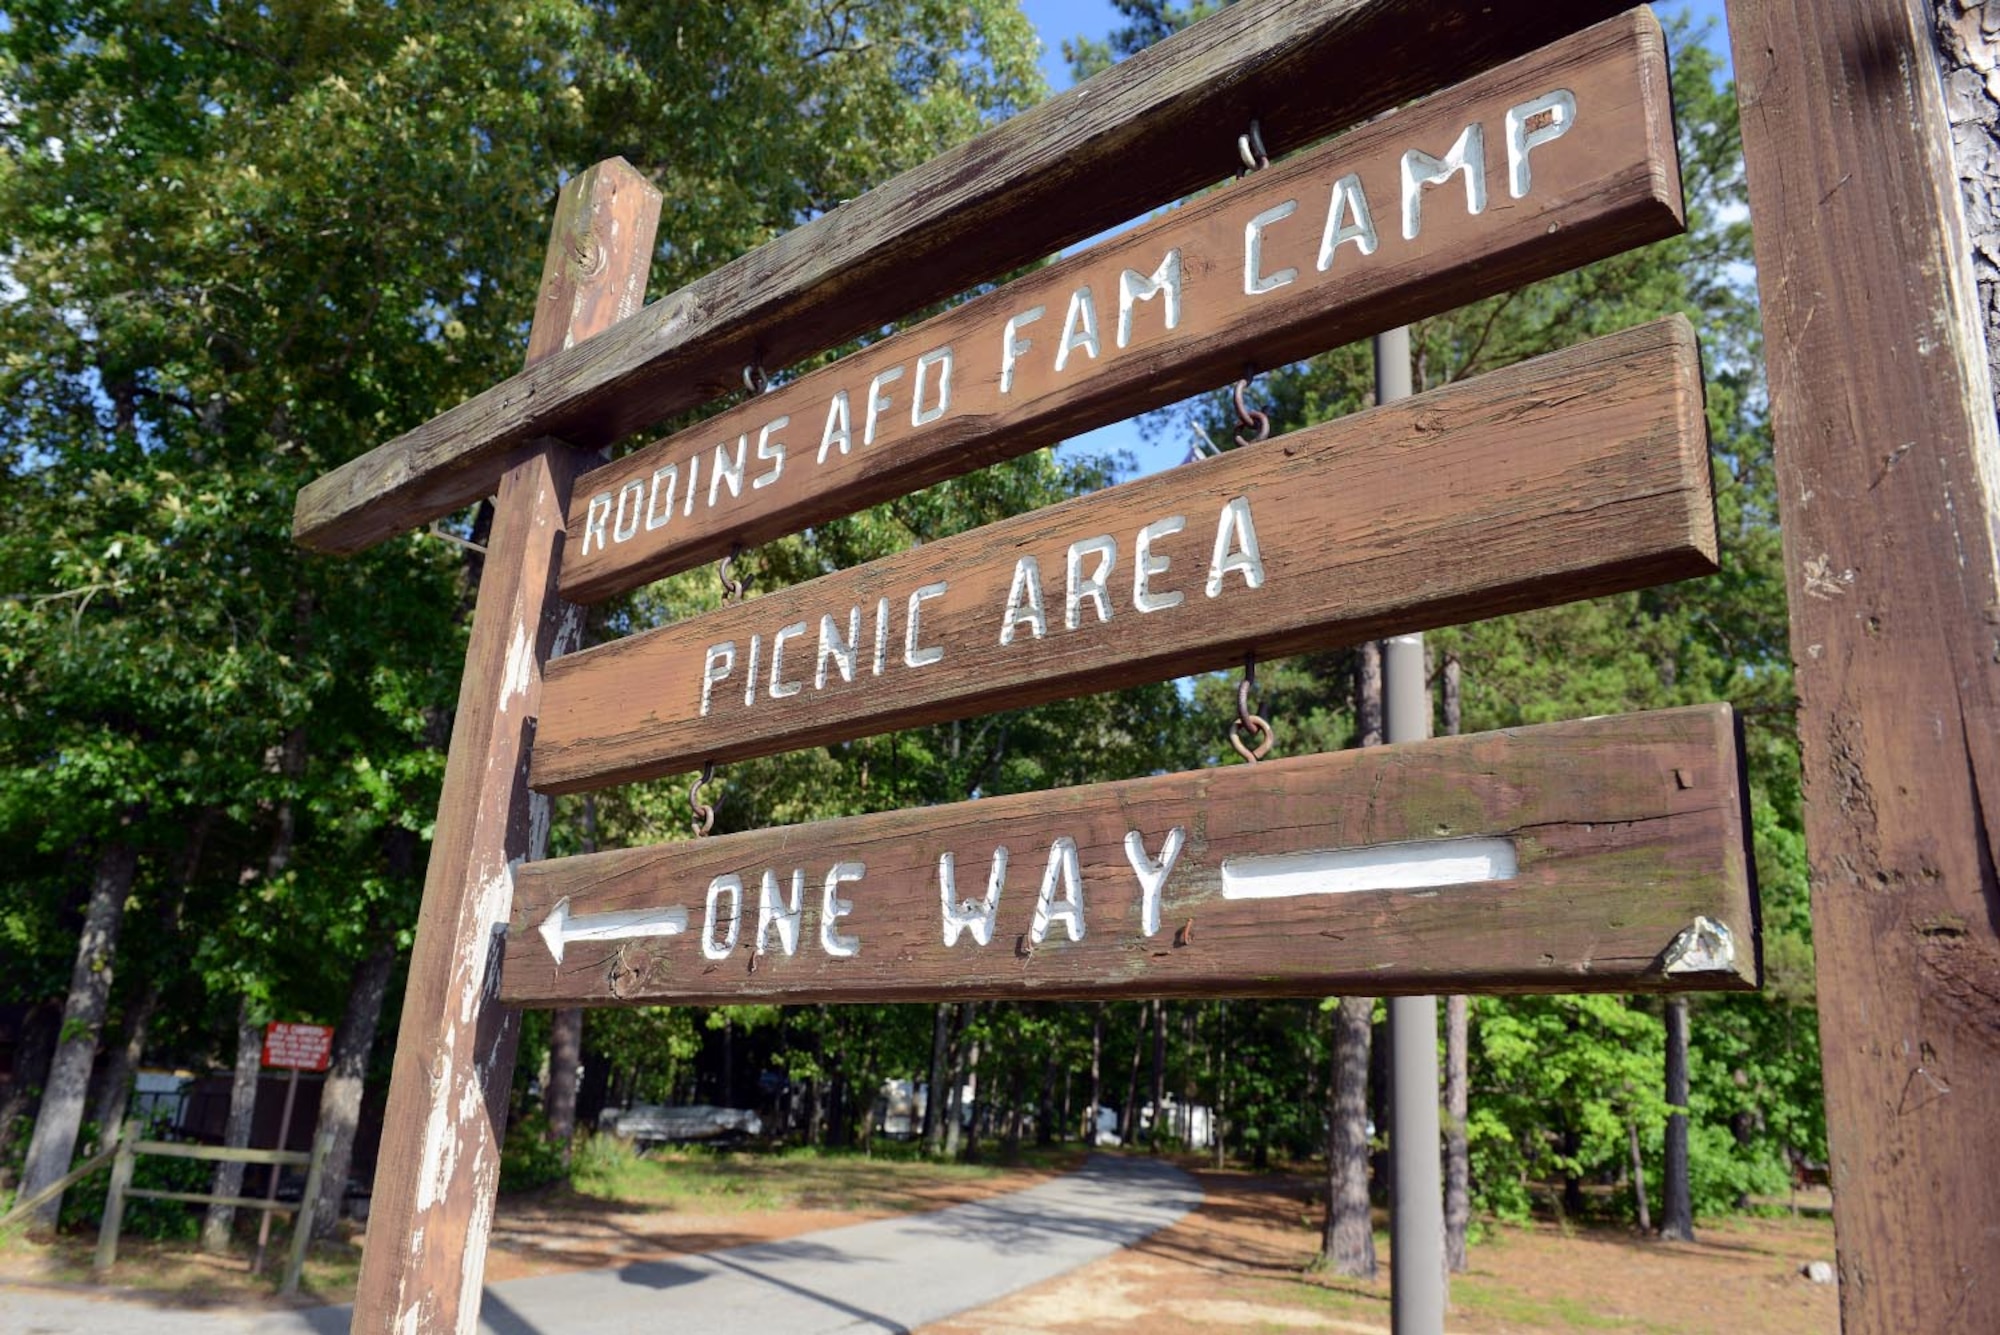 Fam Camp, is a peaceful campground nestled in the woods by Luna Lake. (U.S. Air Force photo by Tommie Horton)